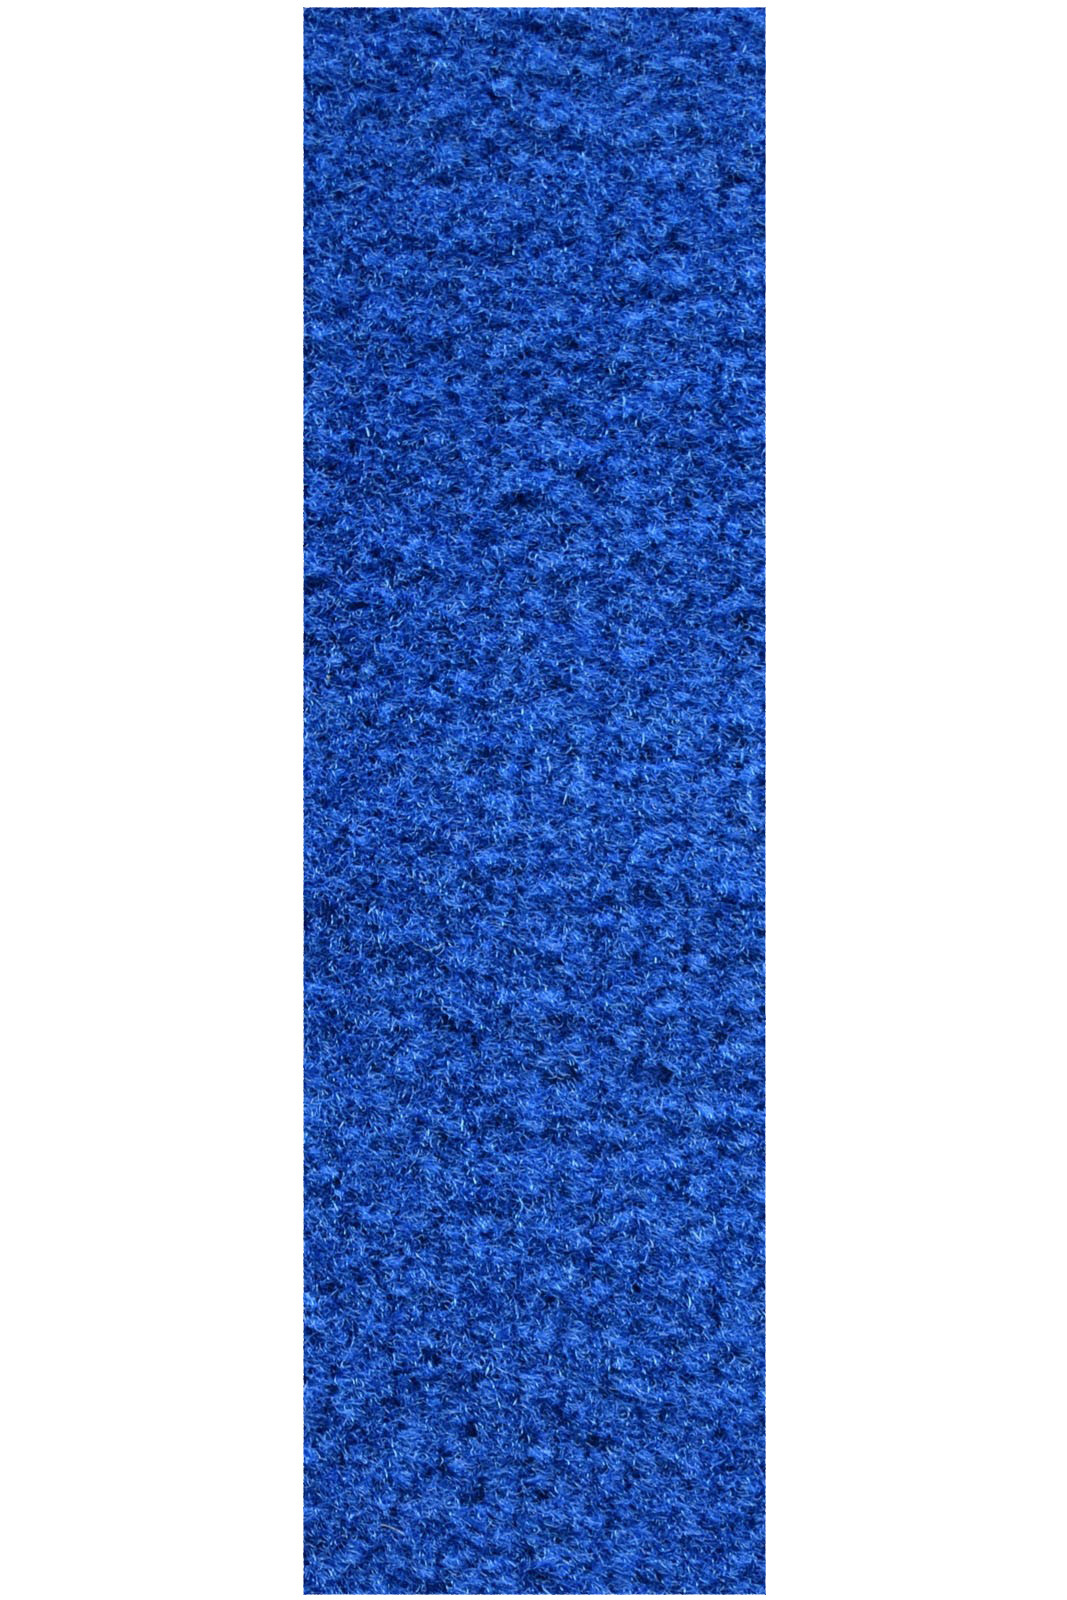 Commercial Indoor/Outdoor Blue Custom Size Runner 2' x 44' - Area Rug with Rubber Marine Backing for Patio, Porch, Deck, Boat, Basement or Garage with Premium Bound Polyester Edges - image 1 of 1